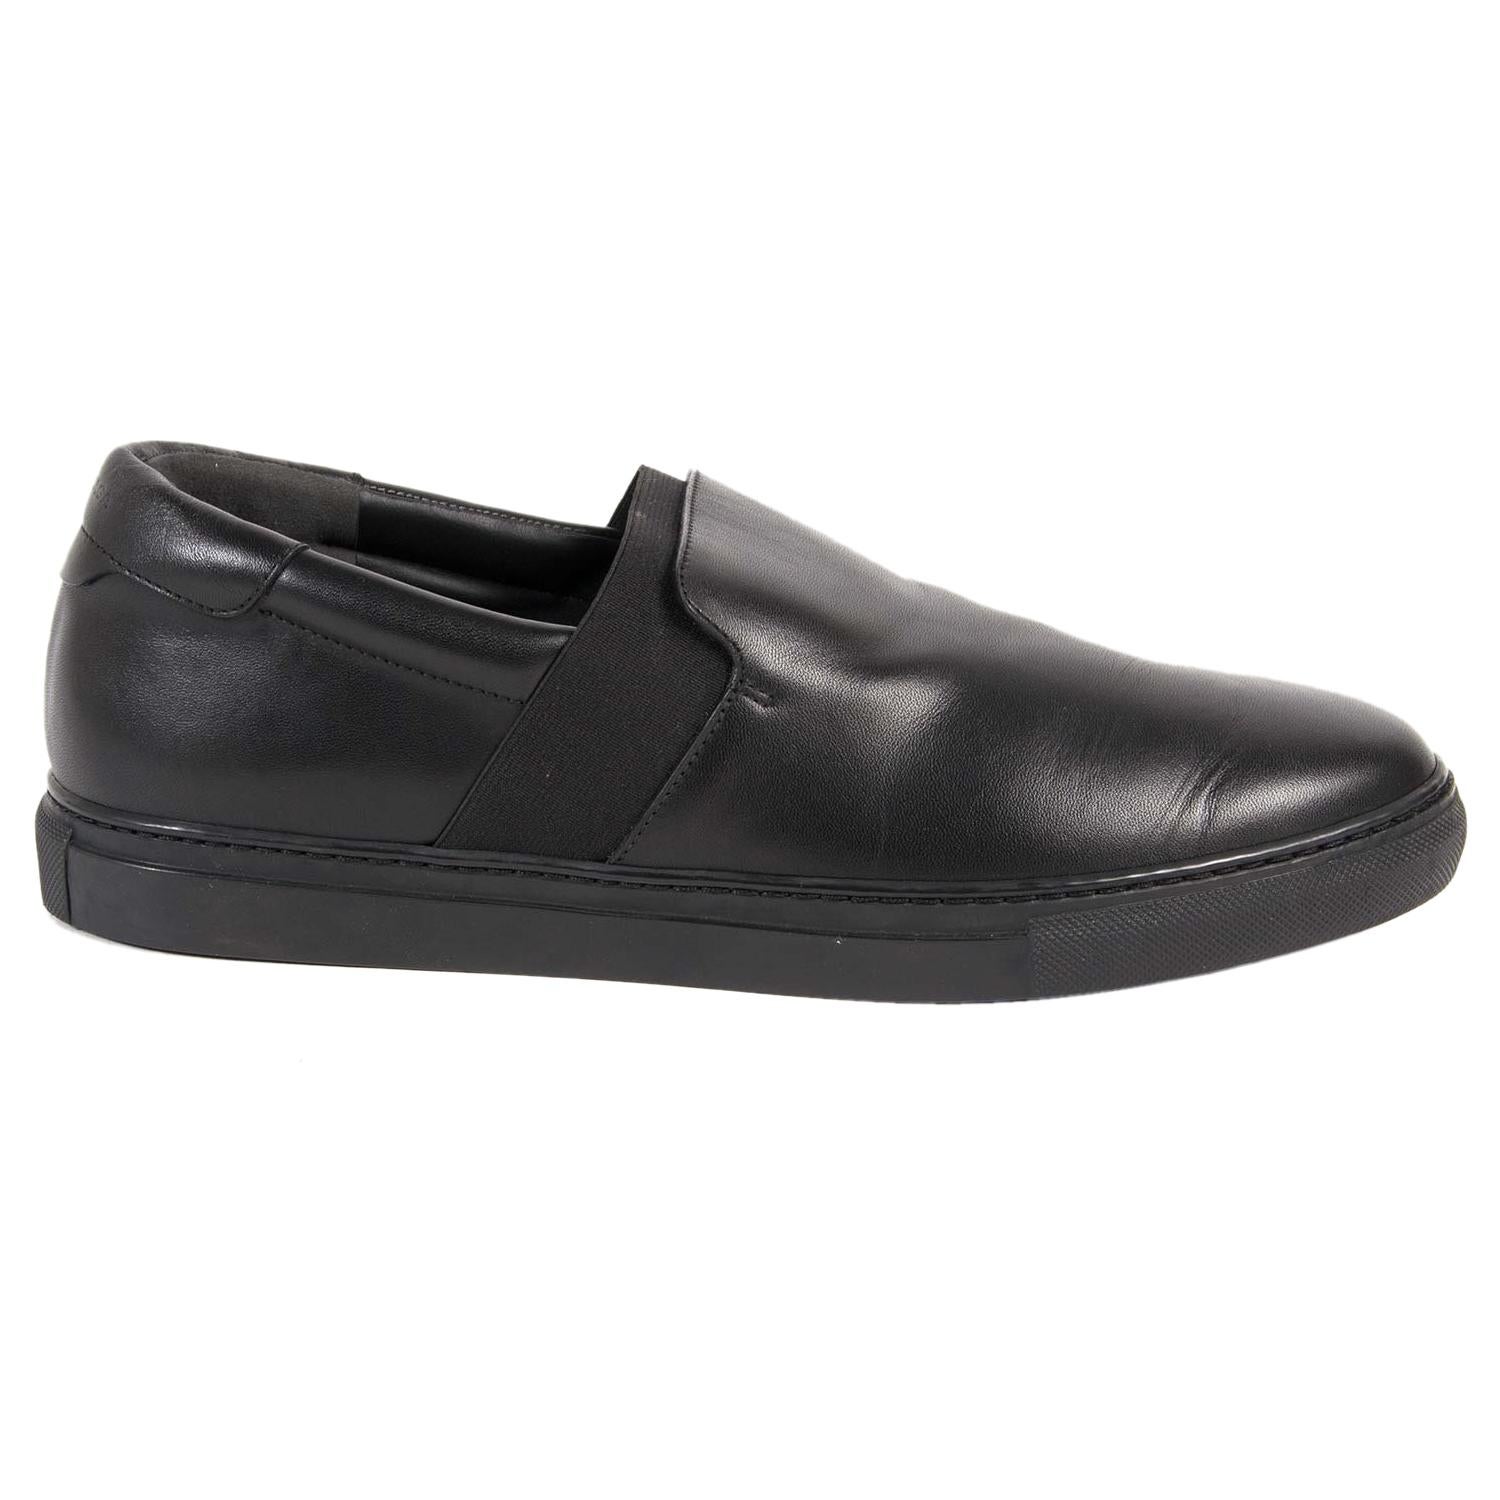 Balenciaga Black Leather Slip-On Sneakers - Size 41 For Sale